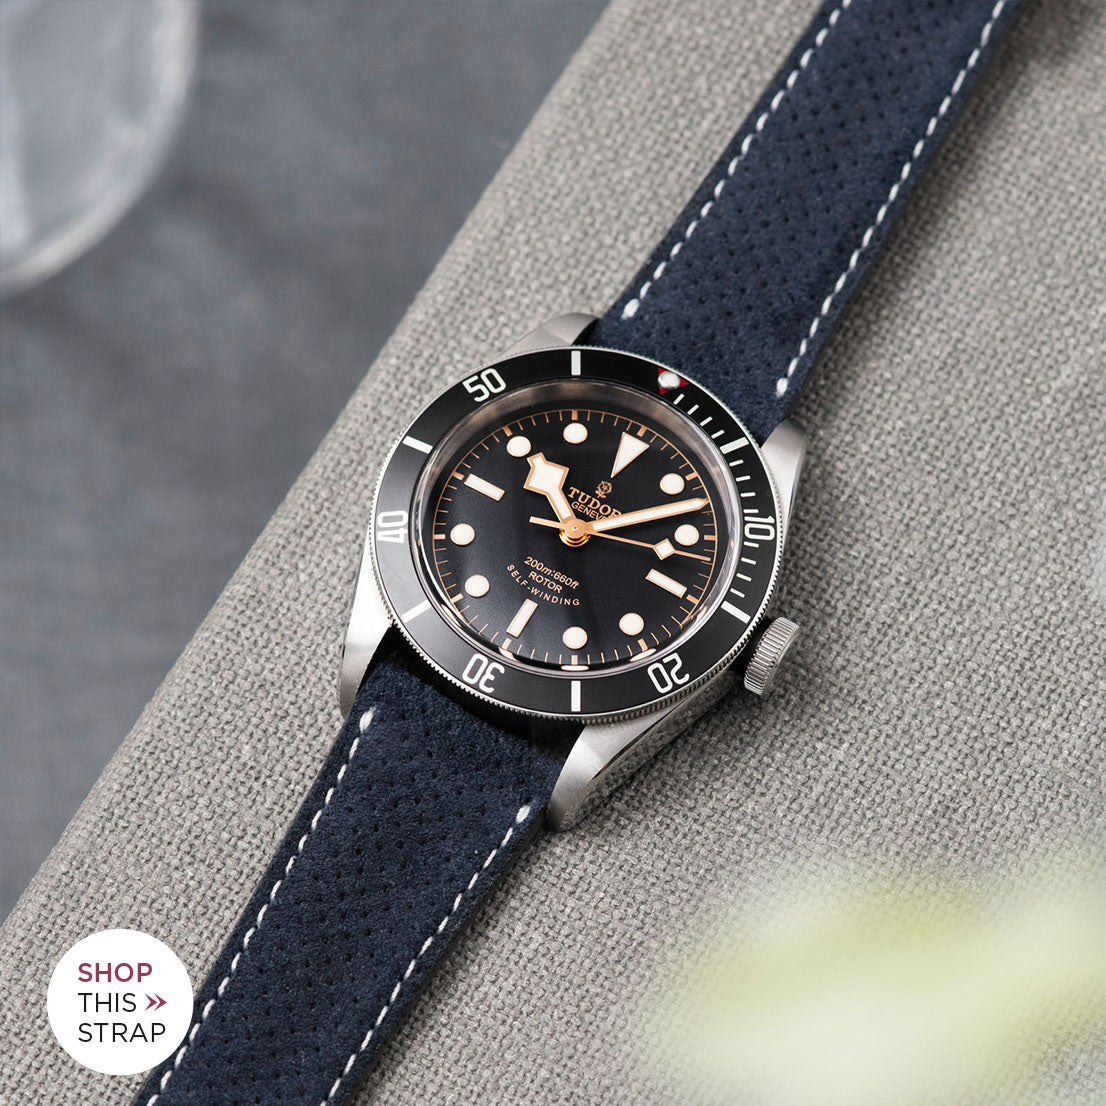 Strap Guide – The Tudor Black Bay Fifty-Eight